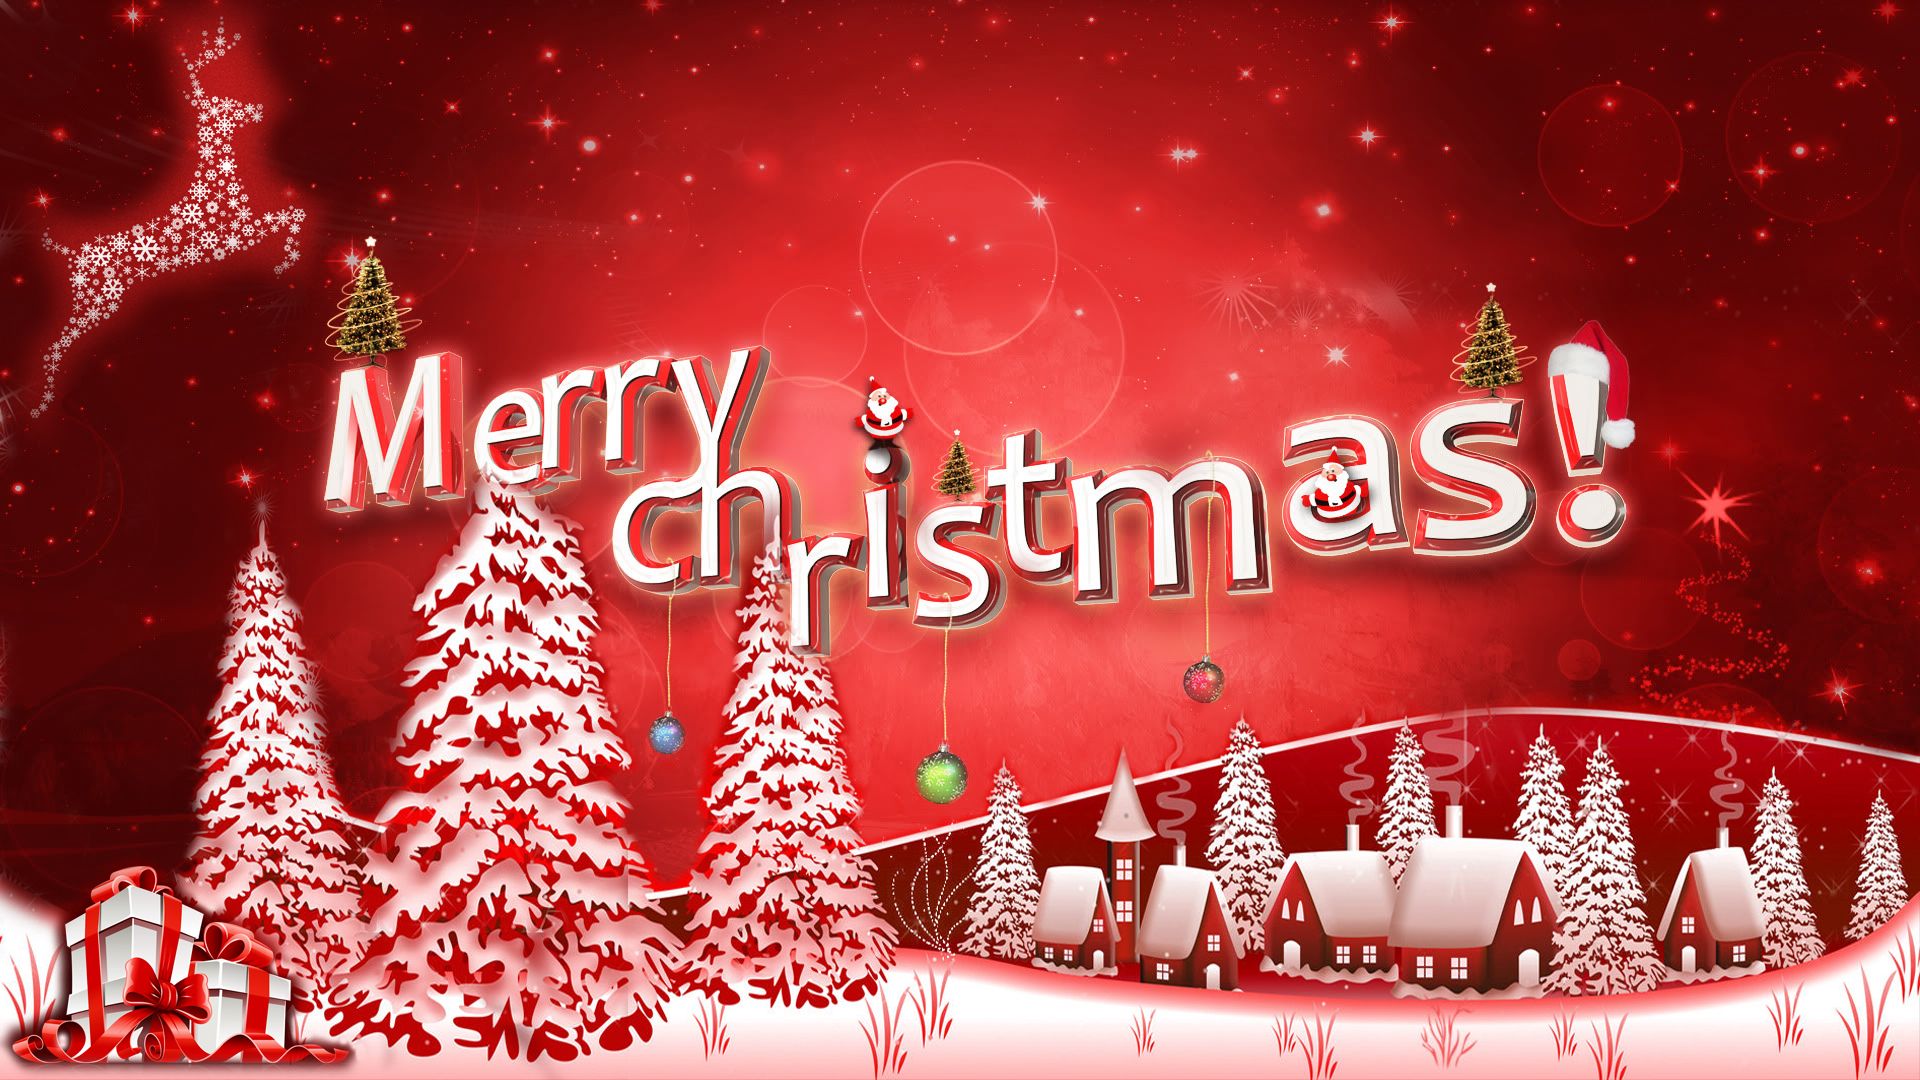 Merry Christmas HD Wallpapers, Image & Greetings Free Download